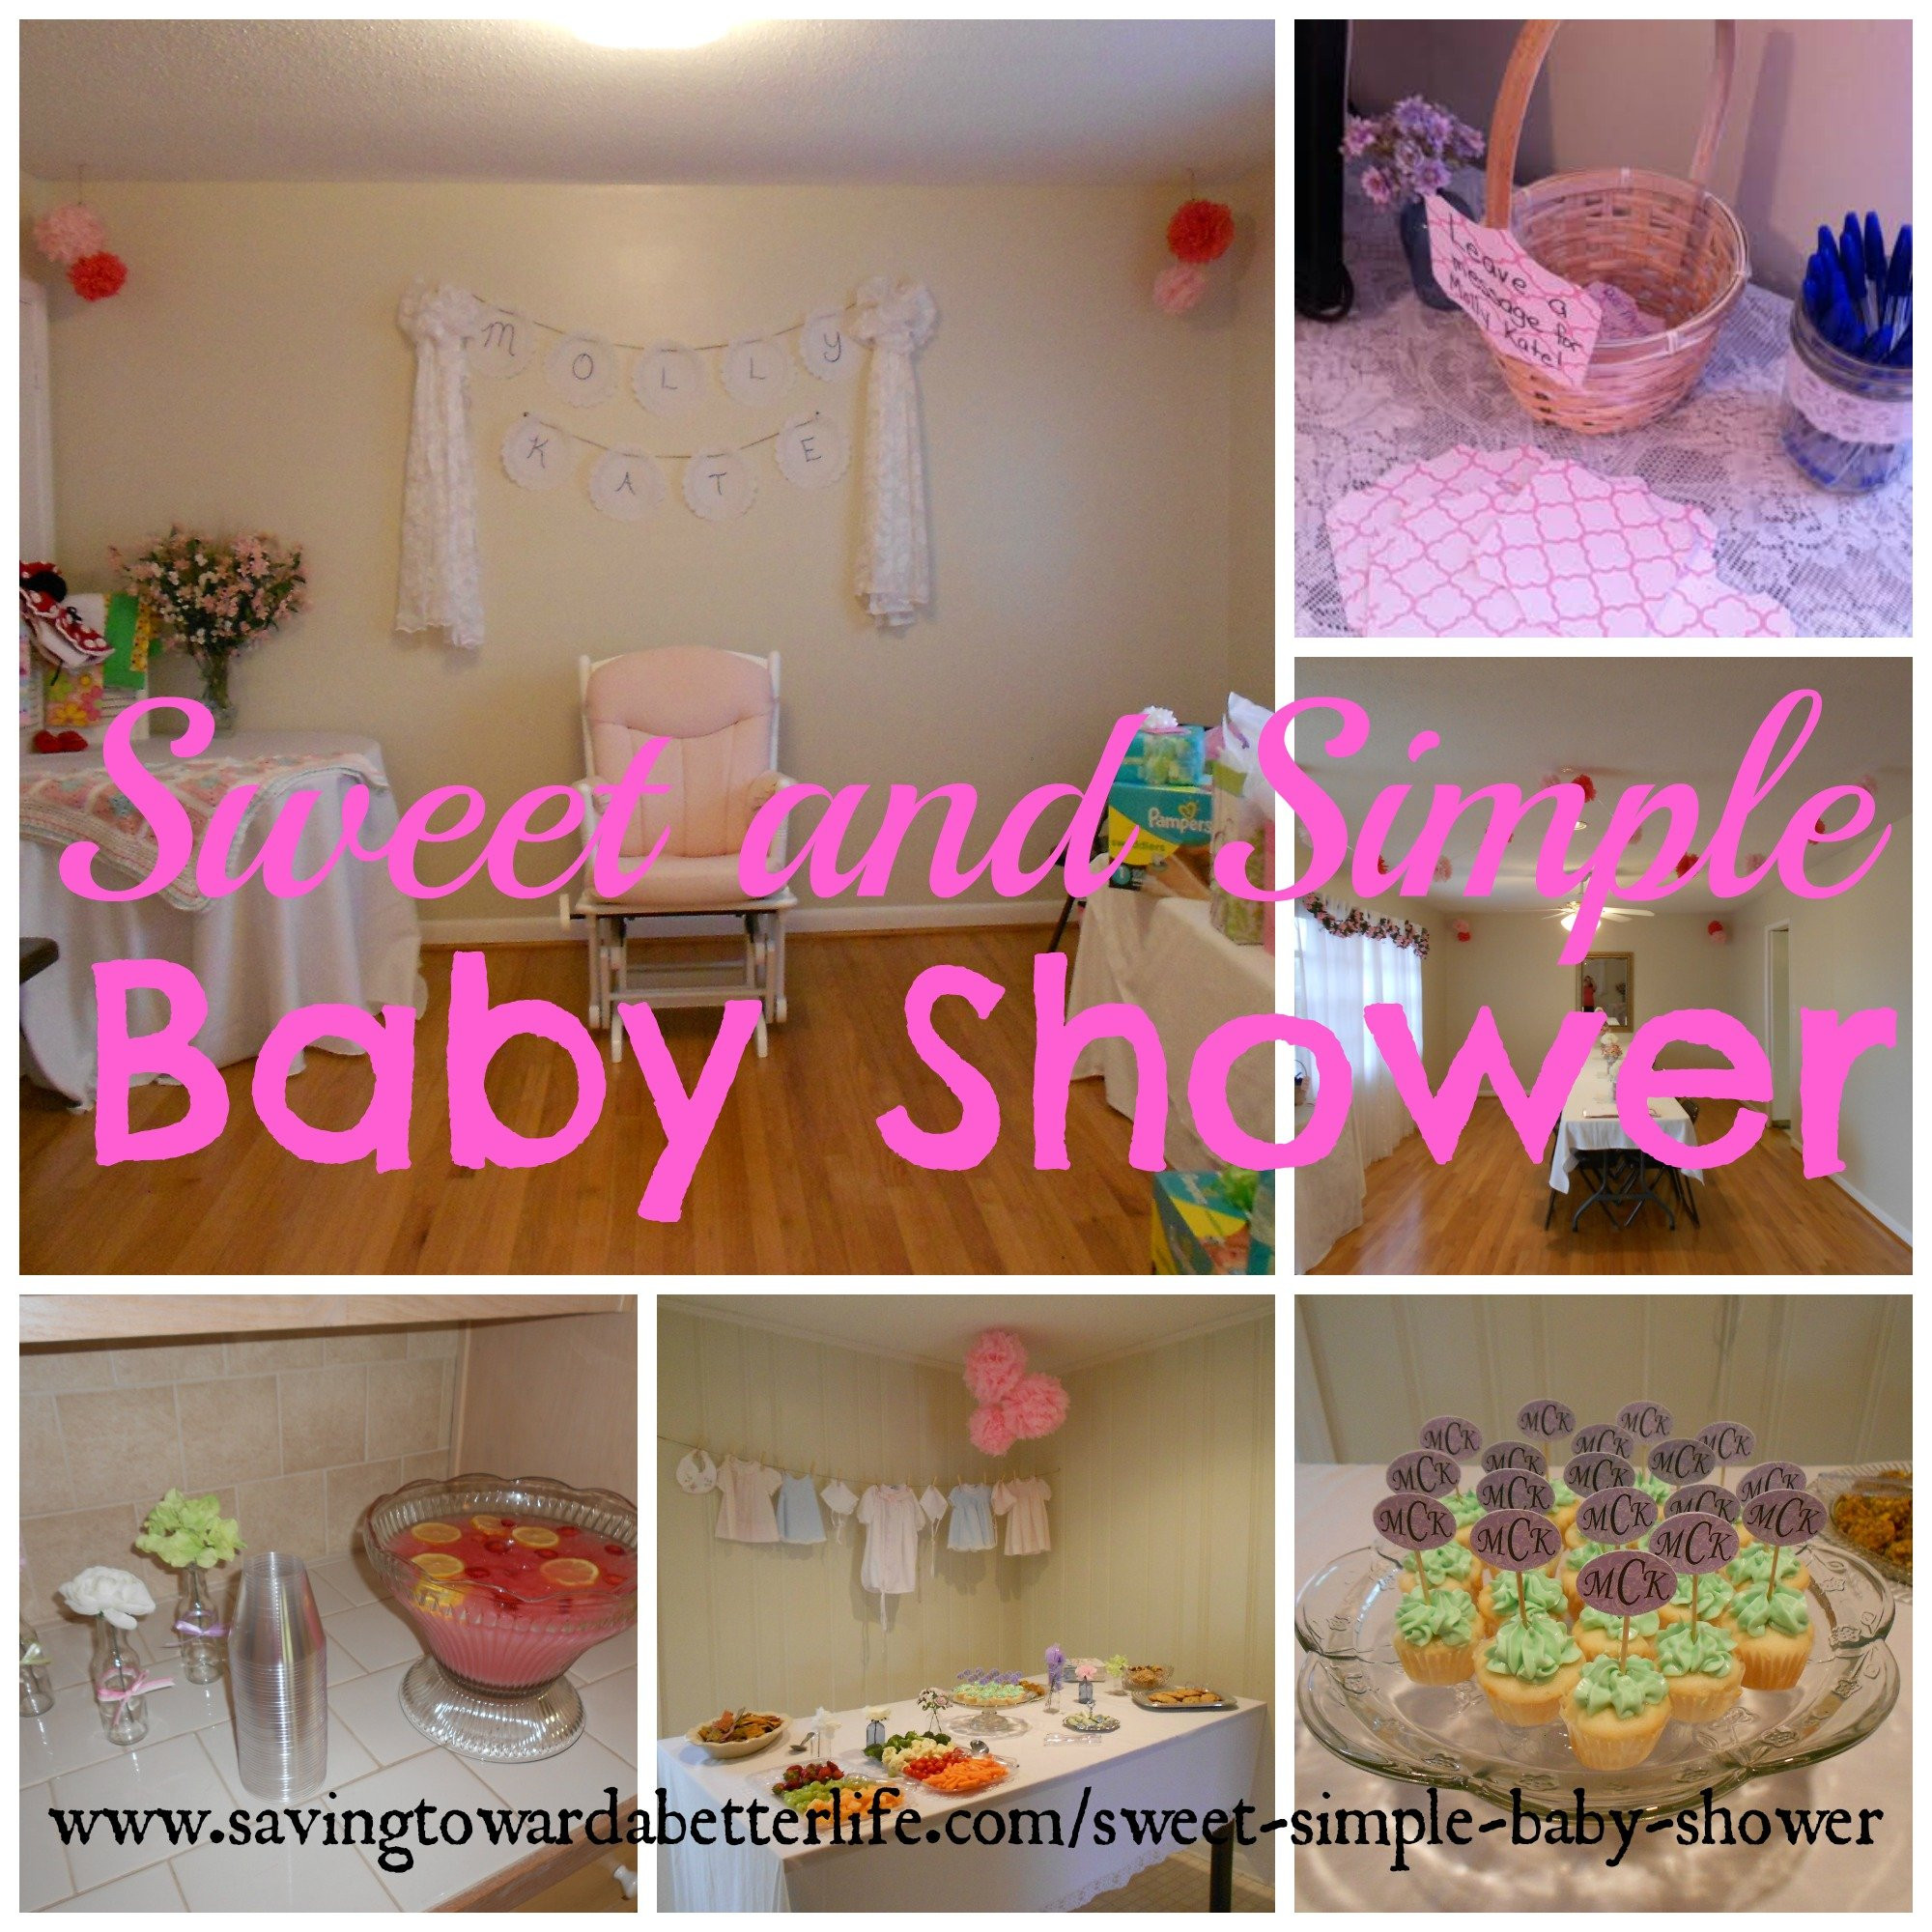 Simple Decor For Baby Shower
 Sweet and Simple Baby Shower Ideas Saving Toward A